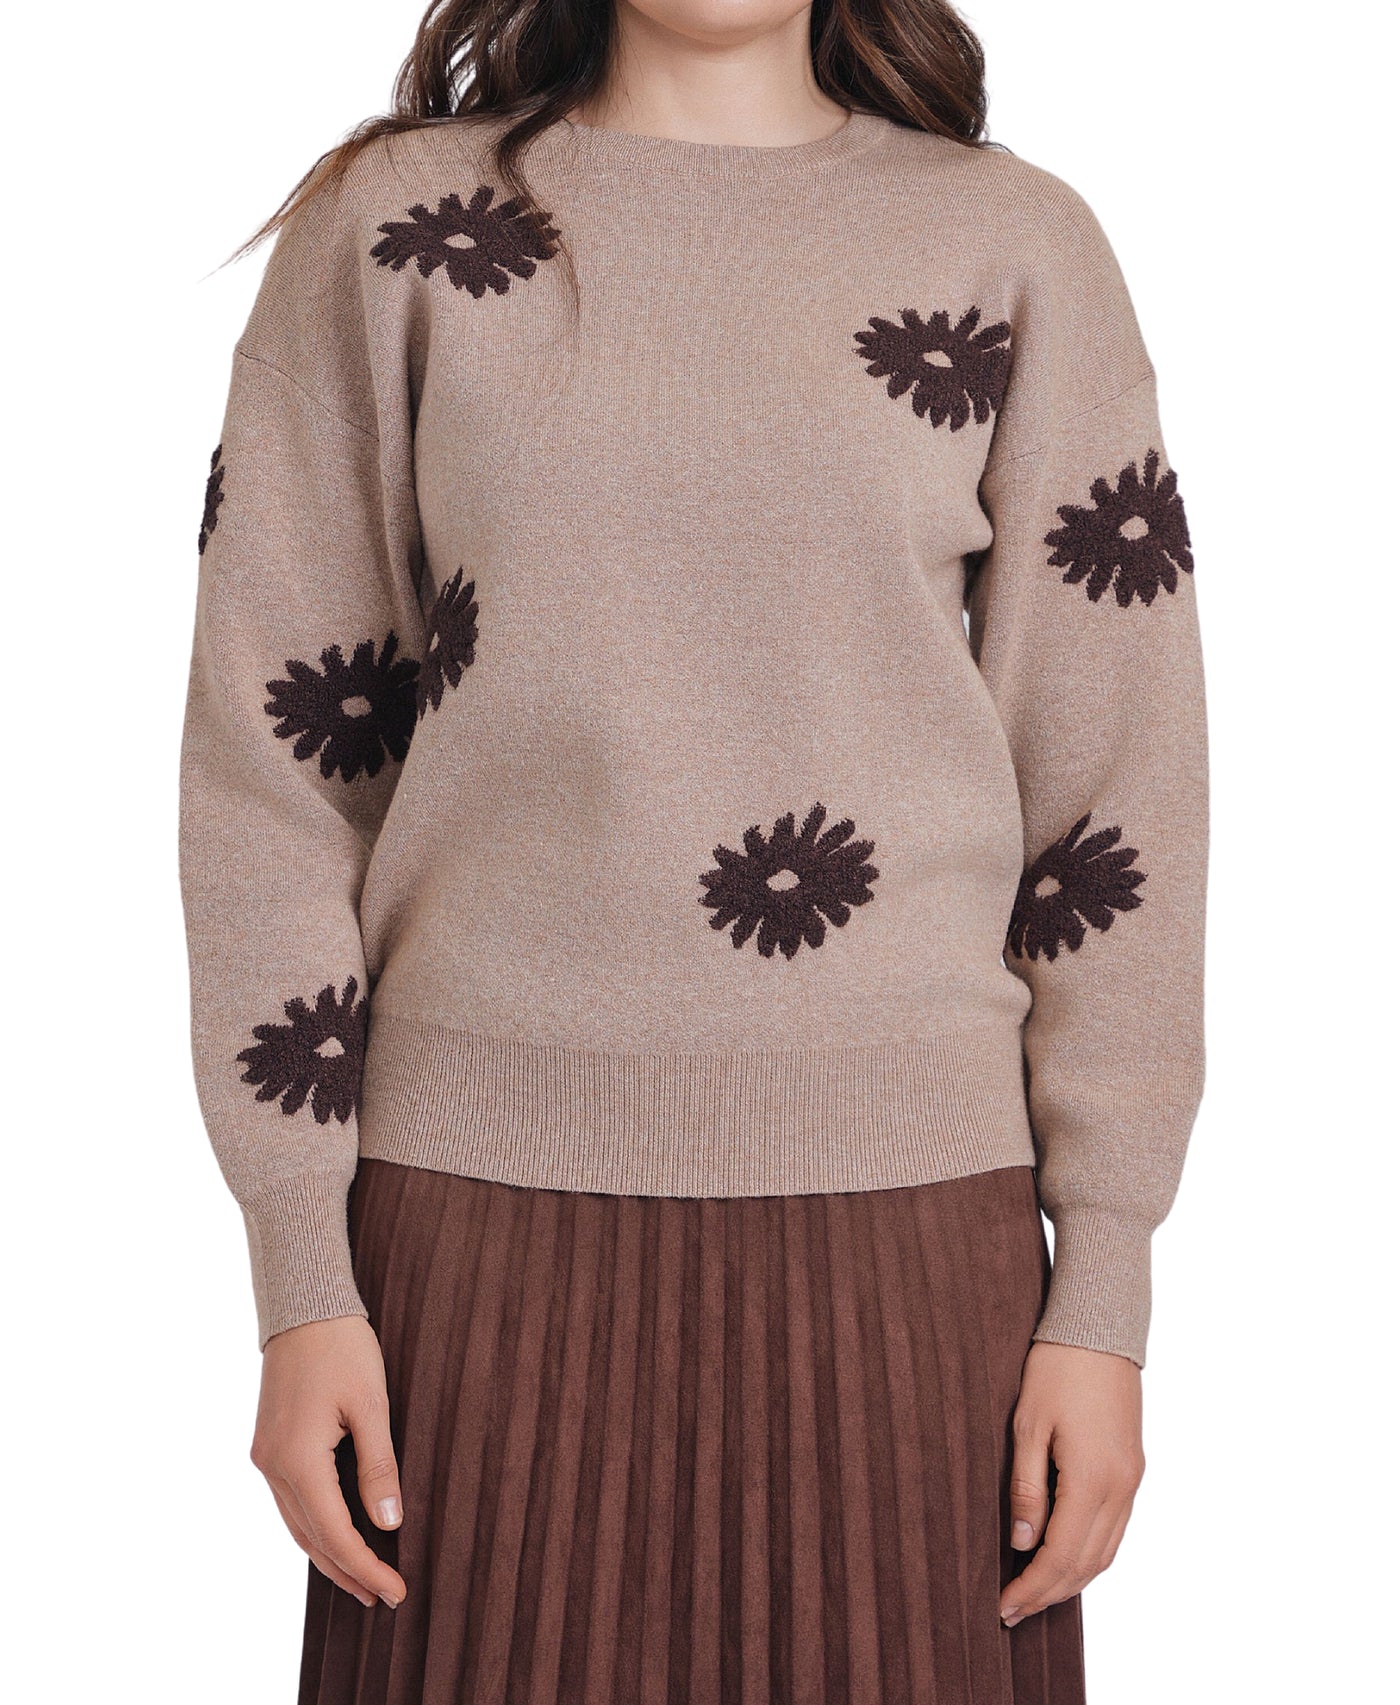 Floral Sweater image 1